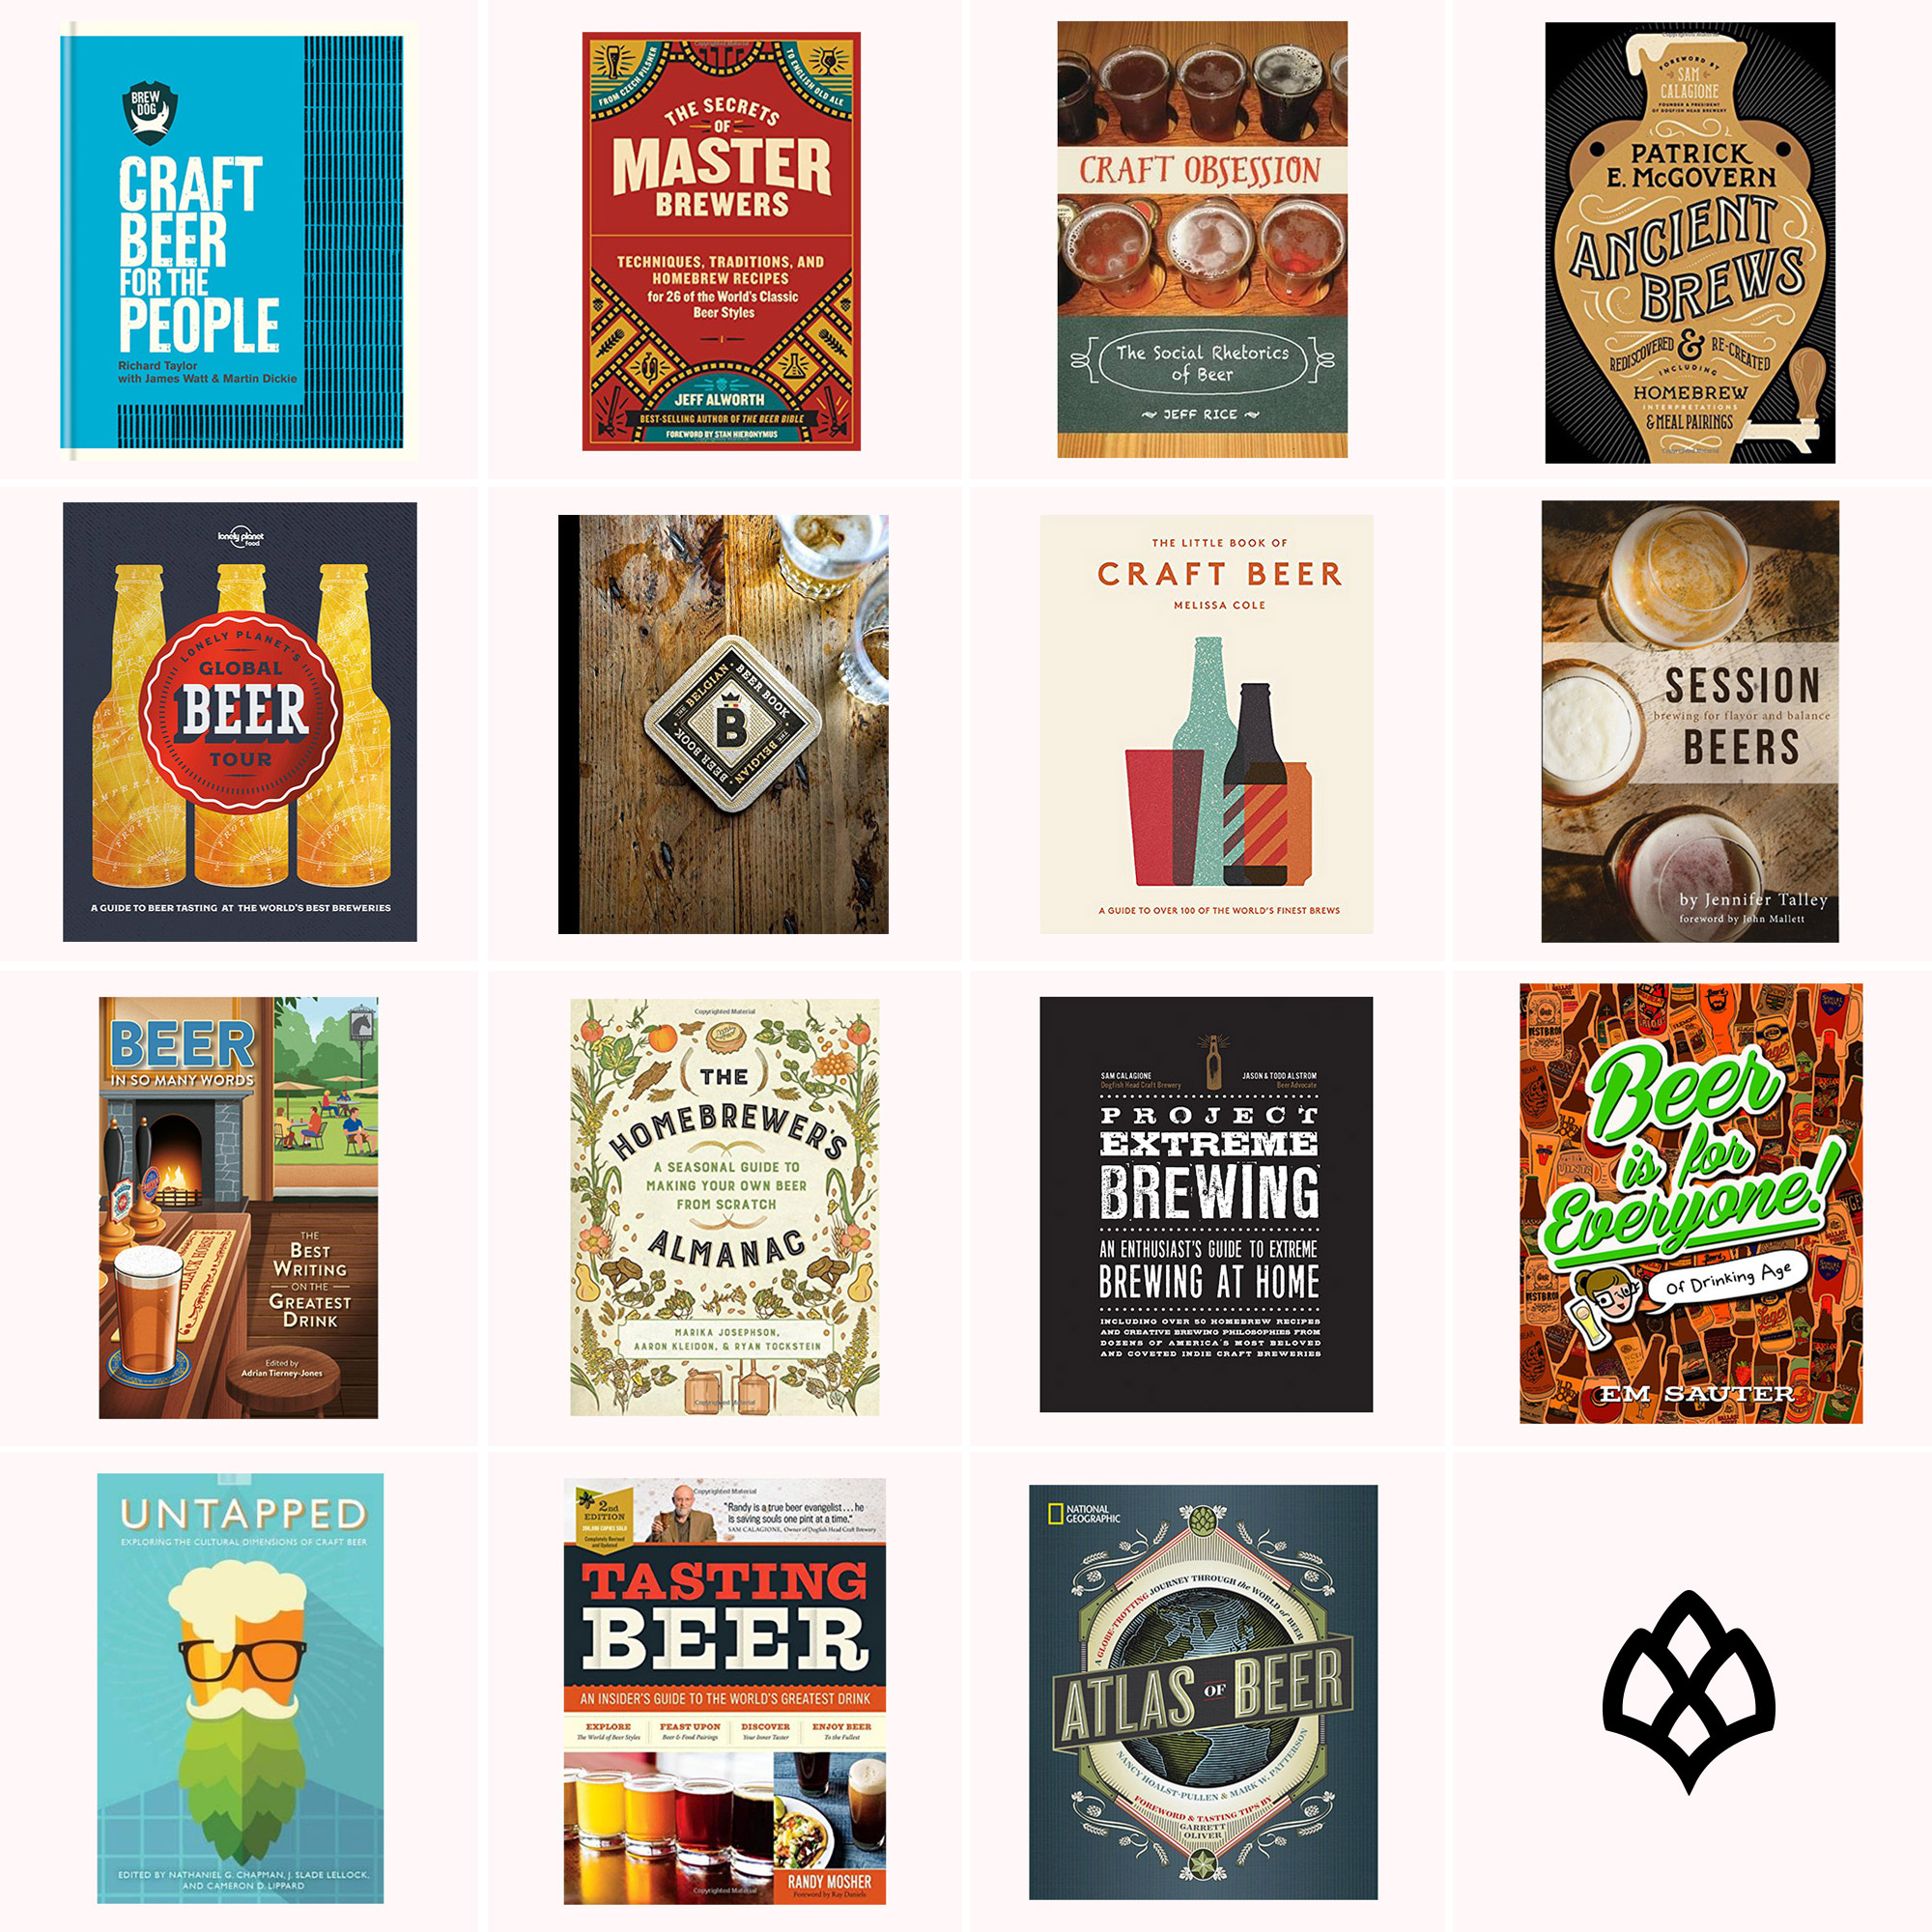 The 15 Best Books About Beer of 2017